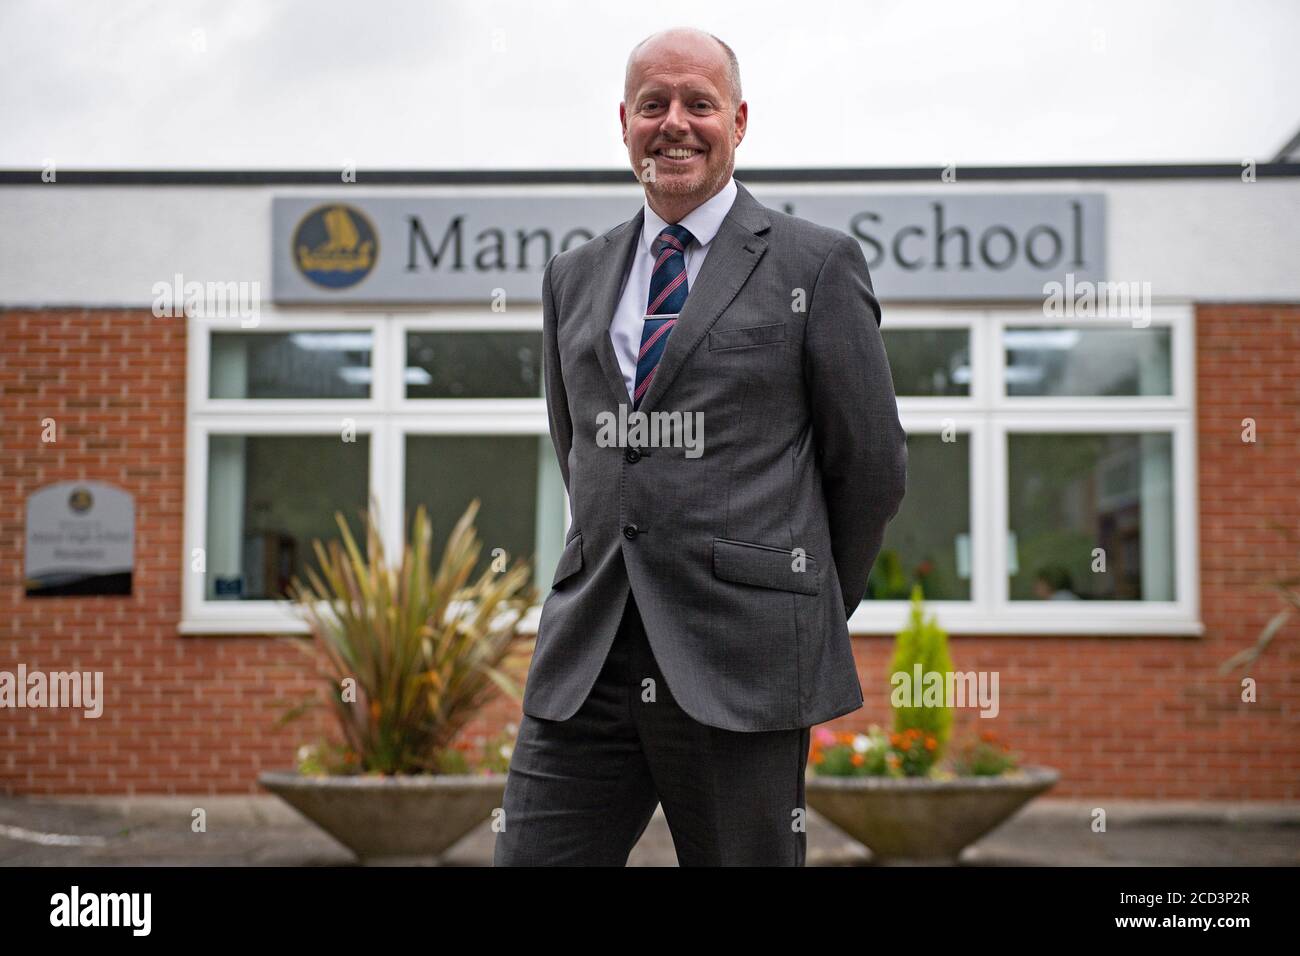 Headteacher Liam Powell outside Manor High School in Oadby, Leicestershire, currently the school has adopted a voluntary policy with regards to students wearing face coverings. Stock Photo